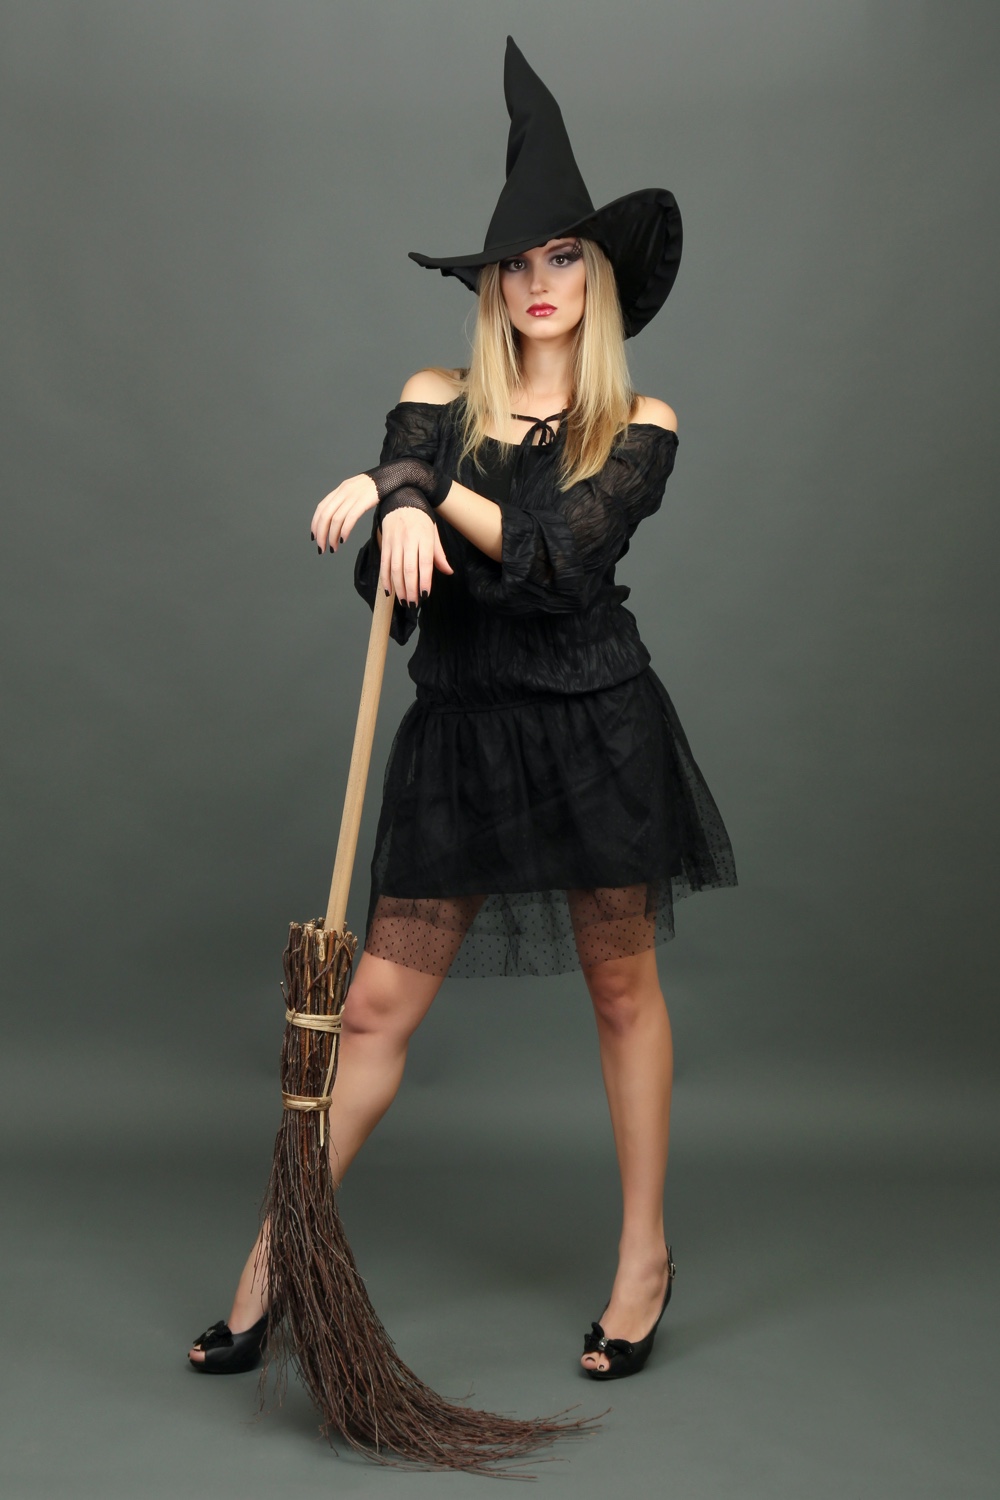 7 Creative Halloween Costumes Ideas for Women | Fashion Gone Rogue